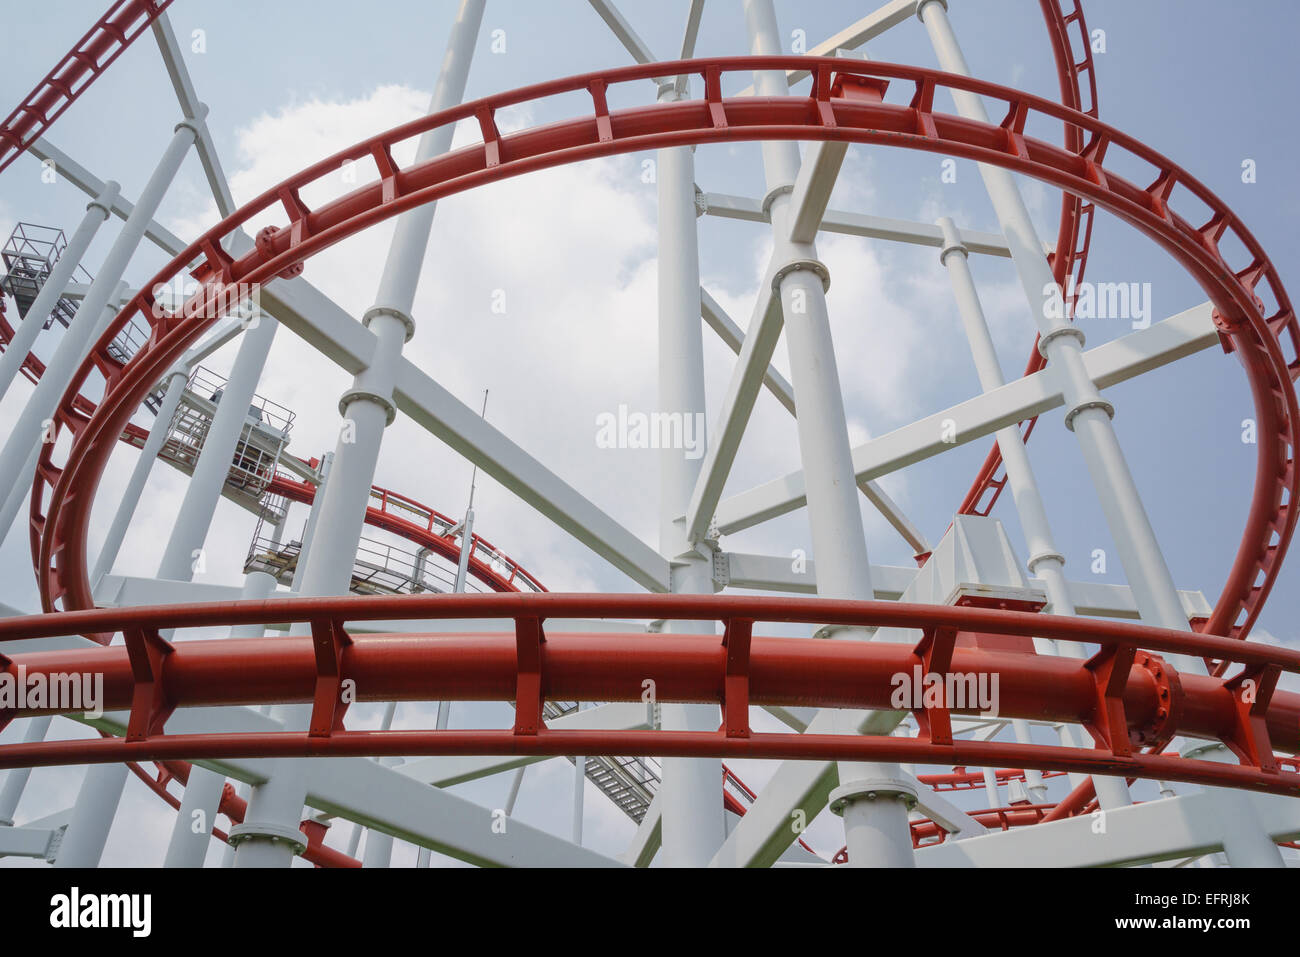 round turn of red roller coaster rail in amusement park look exiting and fun for all visitors to play Stock Photo